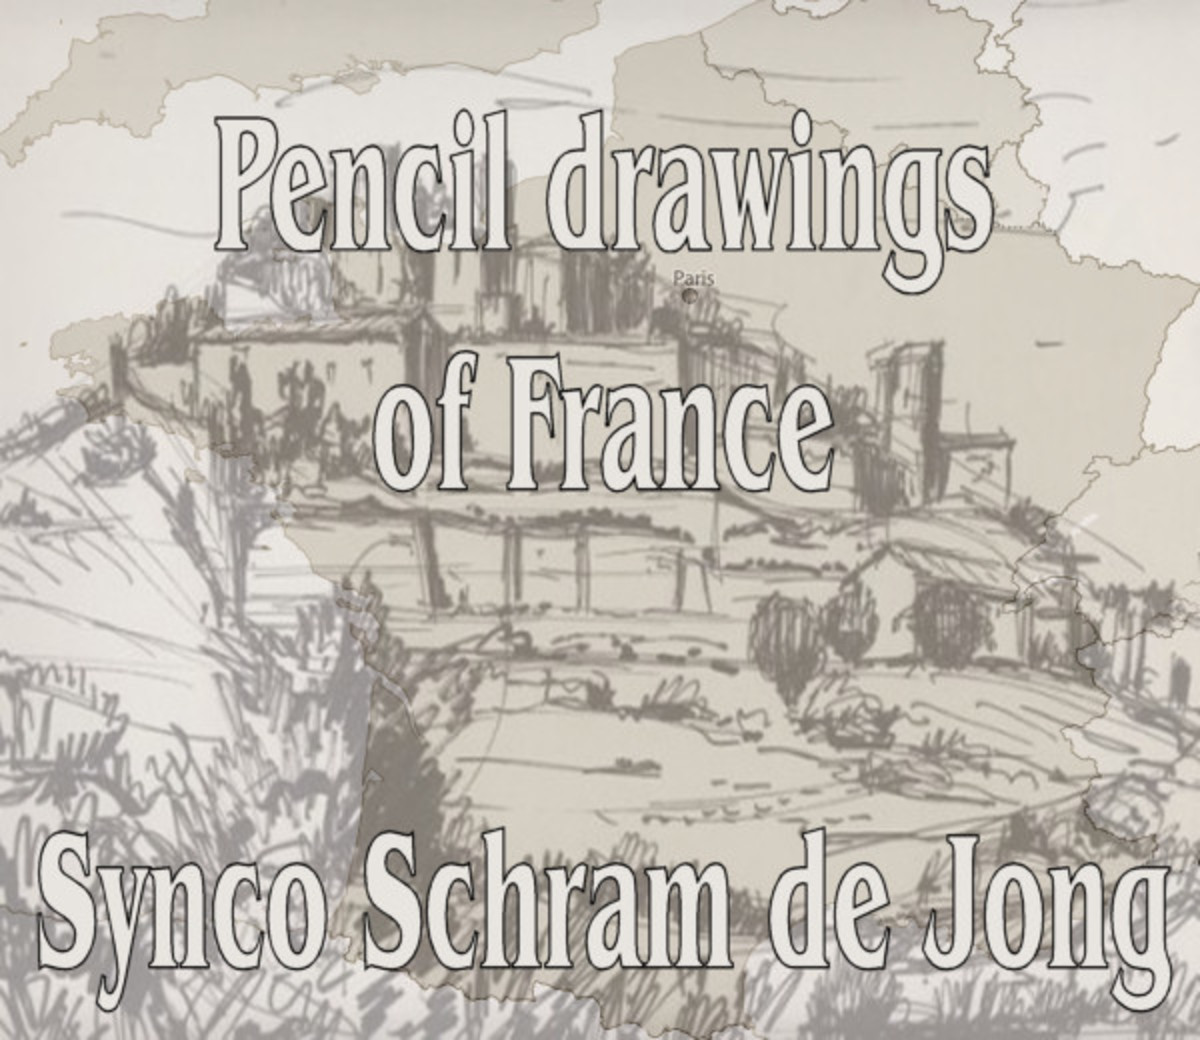 Pencil Drawings of France by Synco Schram de Jong